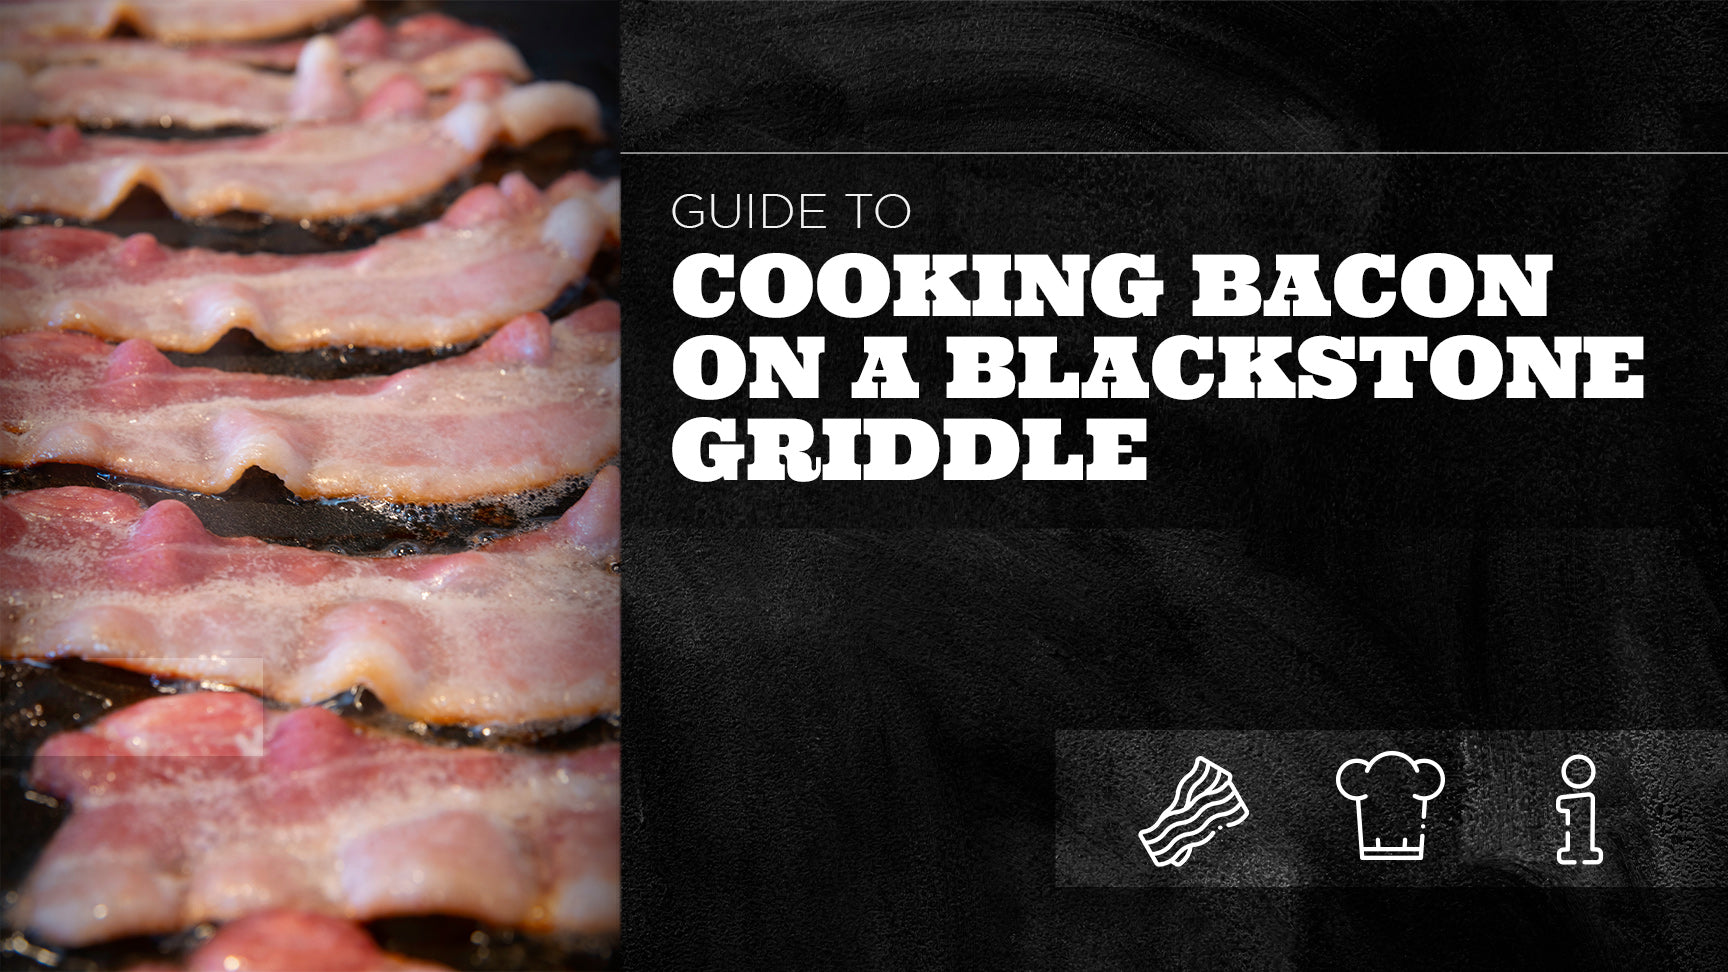 Guide to Cooking Bacon on a Blackstone Griddle – The Bearded Butchers